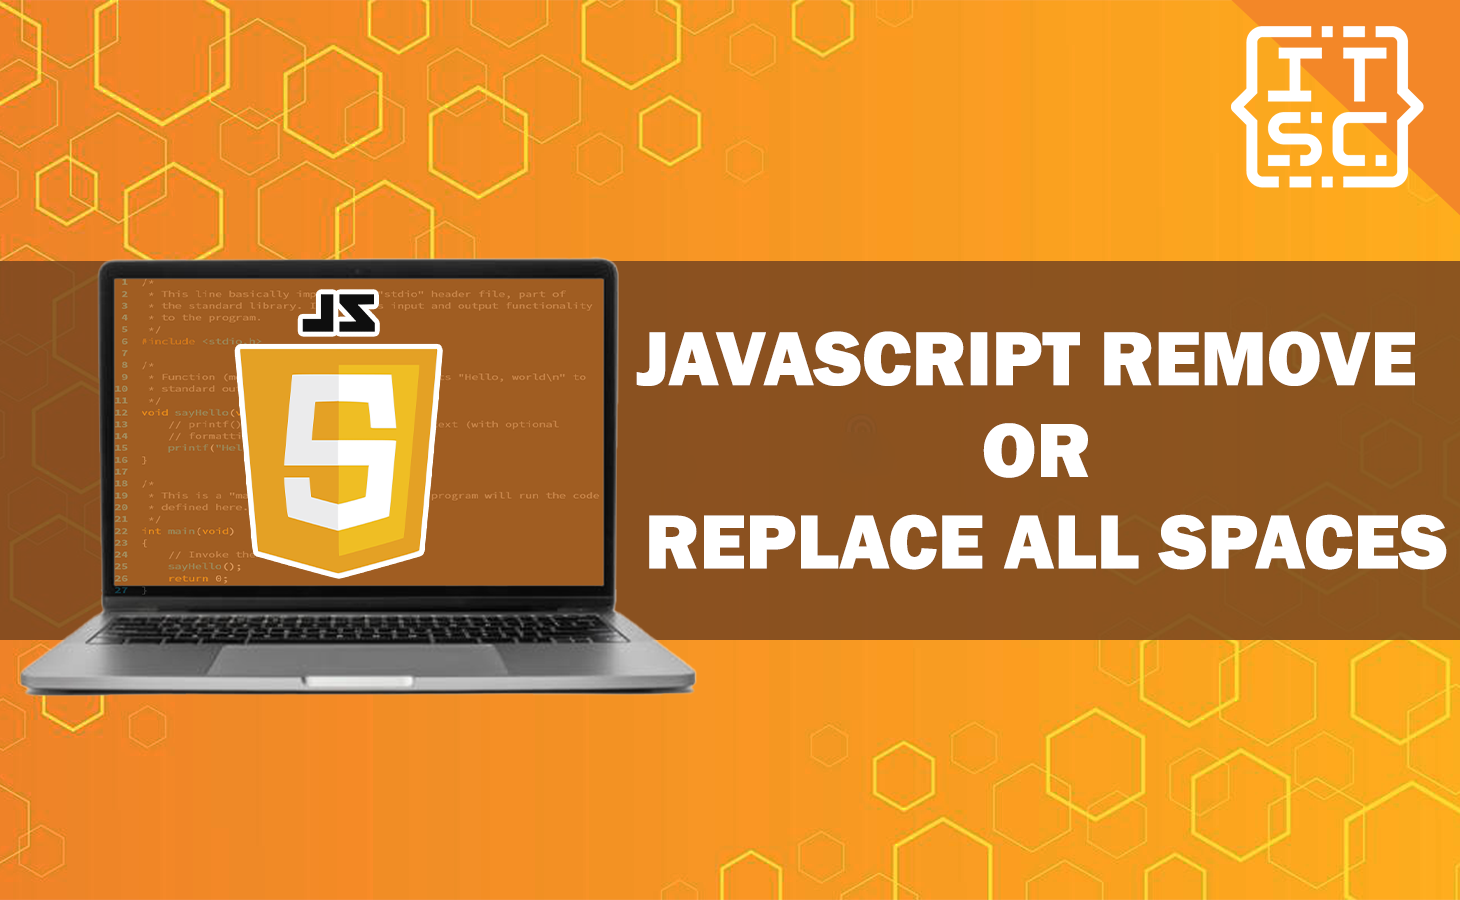 How to replace or remove all spaces from a string in JavaScript?